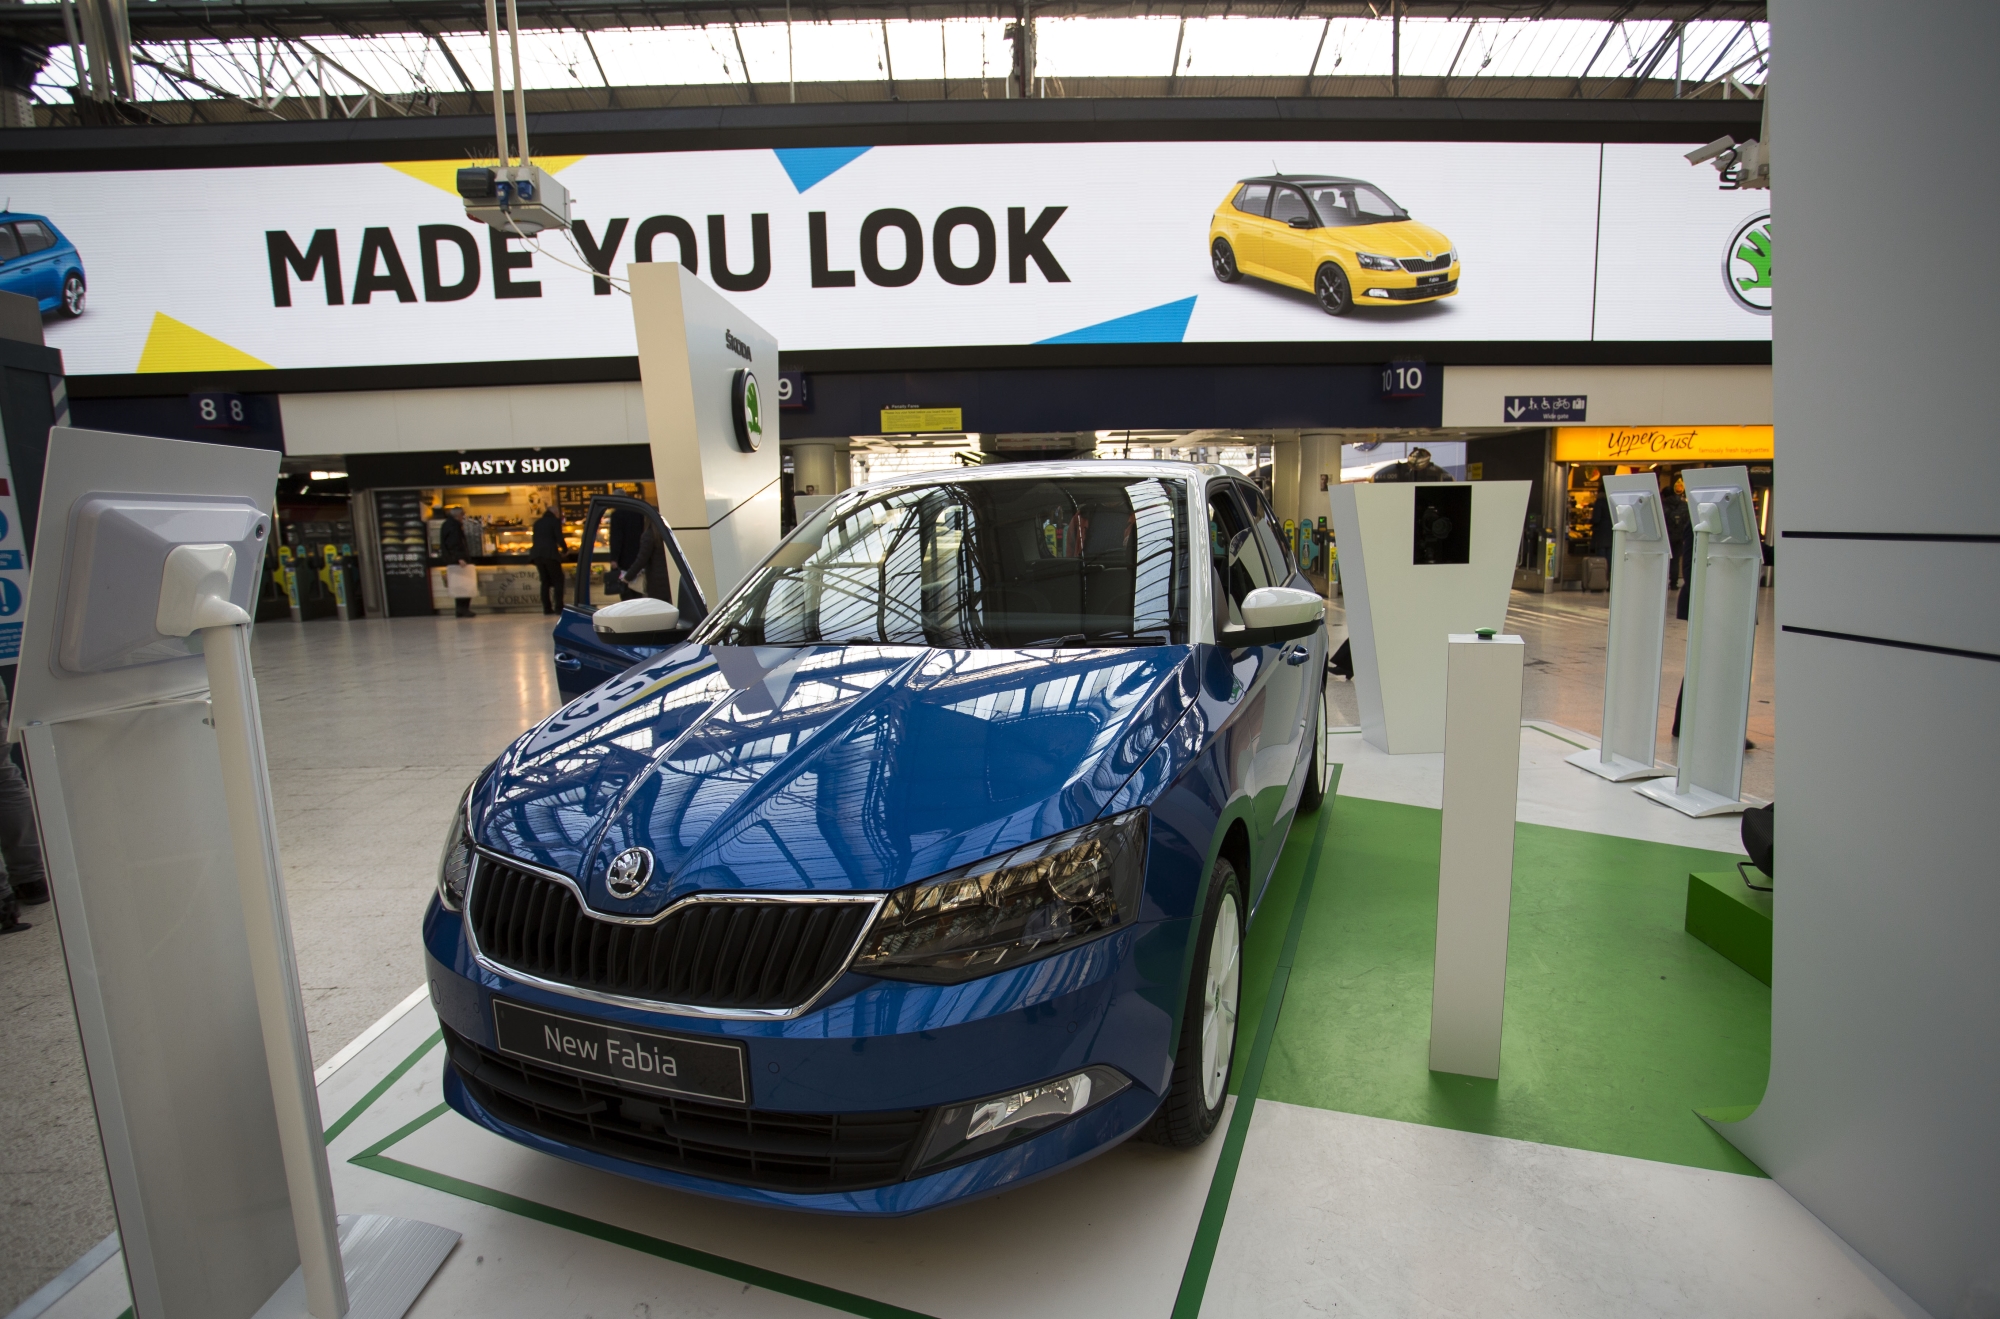 Škoda AR Campaign Puts Commuters in the Driving Seat